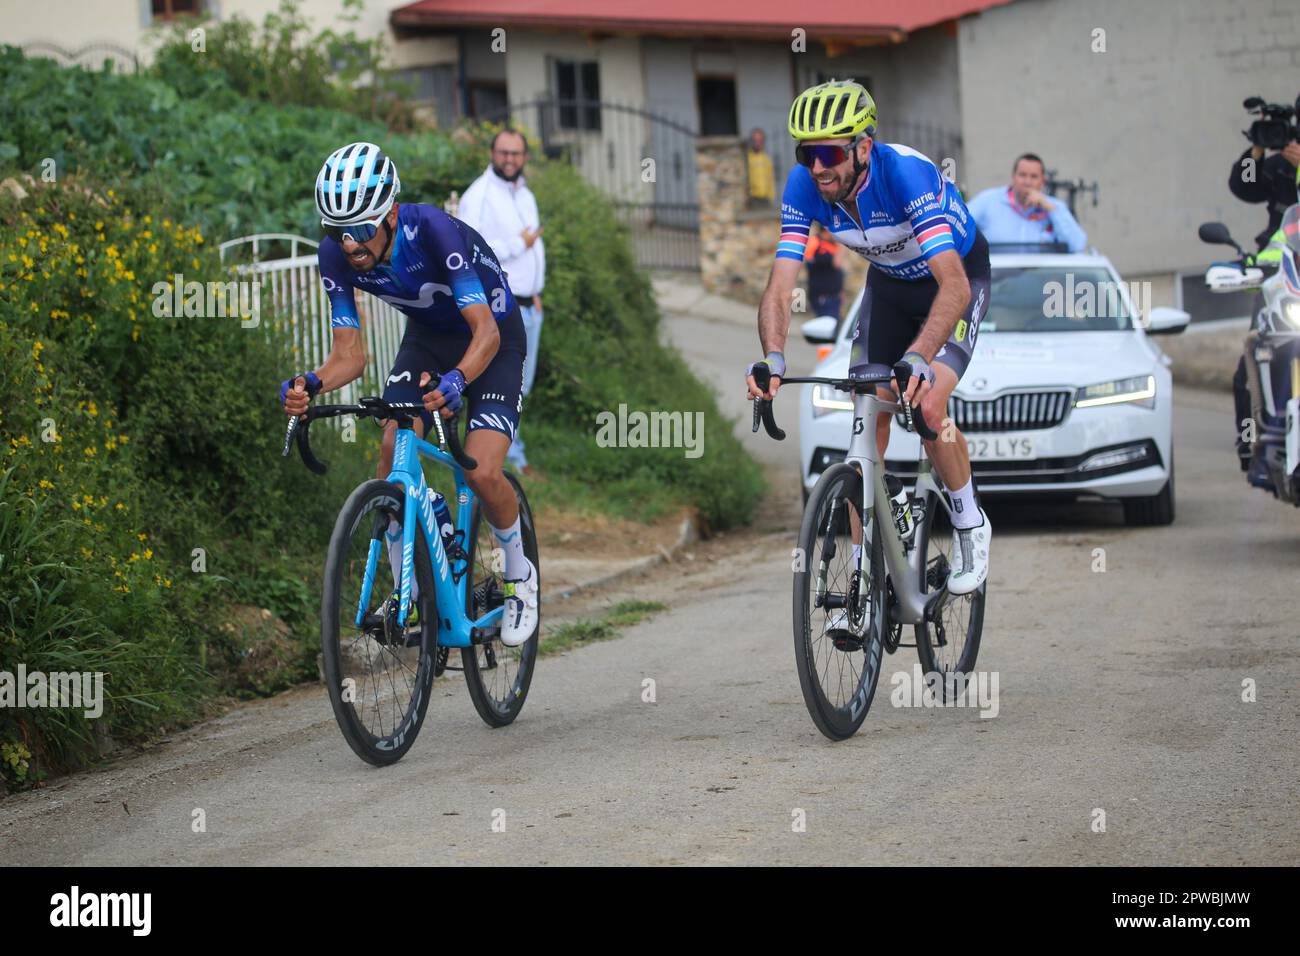 Las Tiendas, Spain, 29th April, 2023: Movistar Team rider Ivan Ramiro Sosa (L) suffers next to Damien Howson (Q36.5 Pro Cycling Team, R) during the 2nd stage of the Vuelta a Asturias 2023 between Candas and Cangas del Narcea, on April 29, 2023, in Las Tiendas, Spain. Credit: Alberto Brevers / Alamy Live News Stock Photo